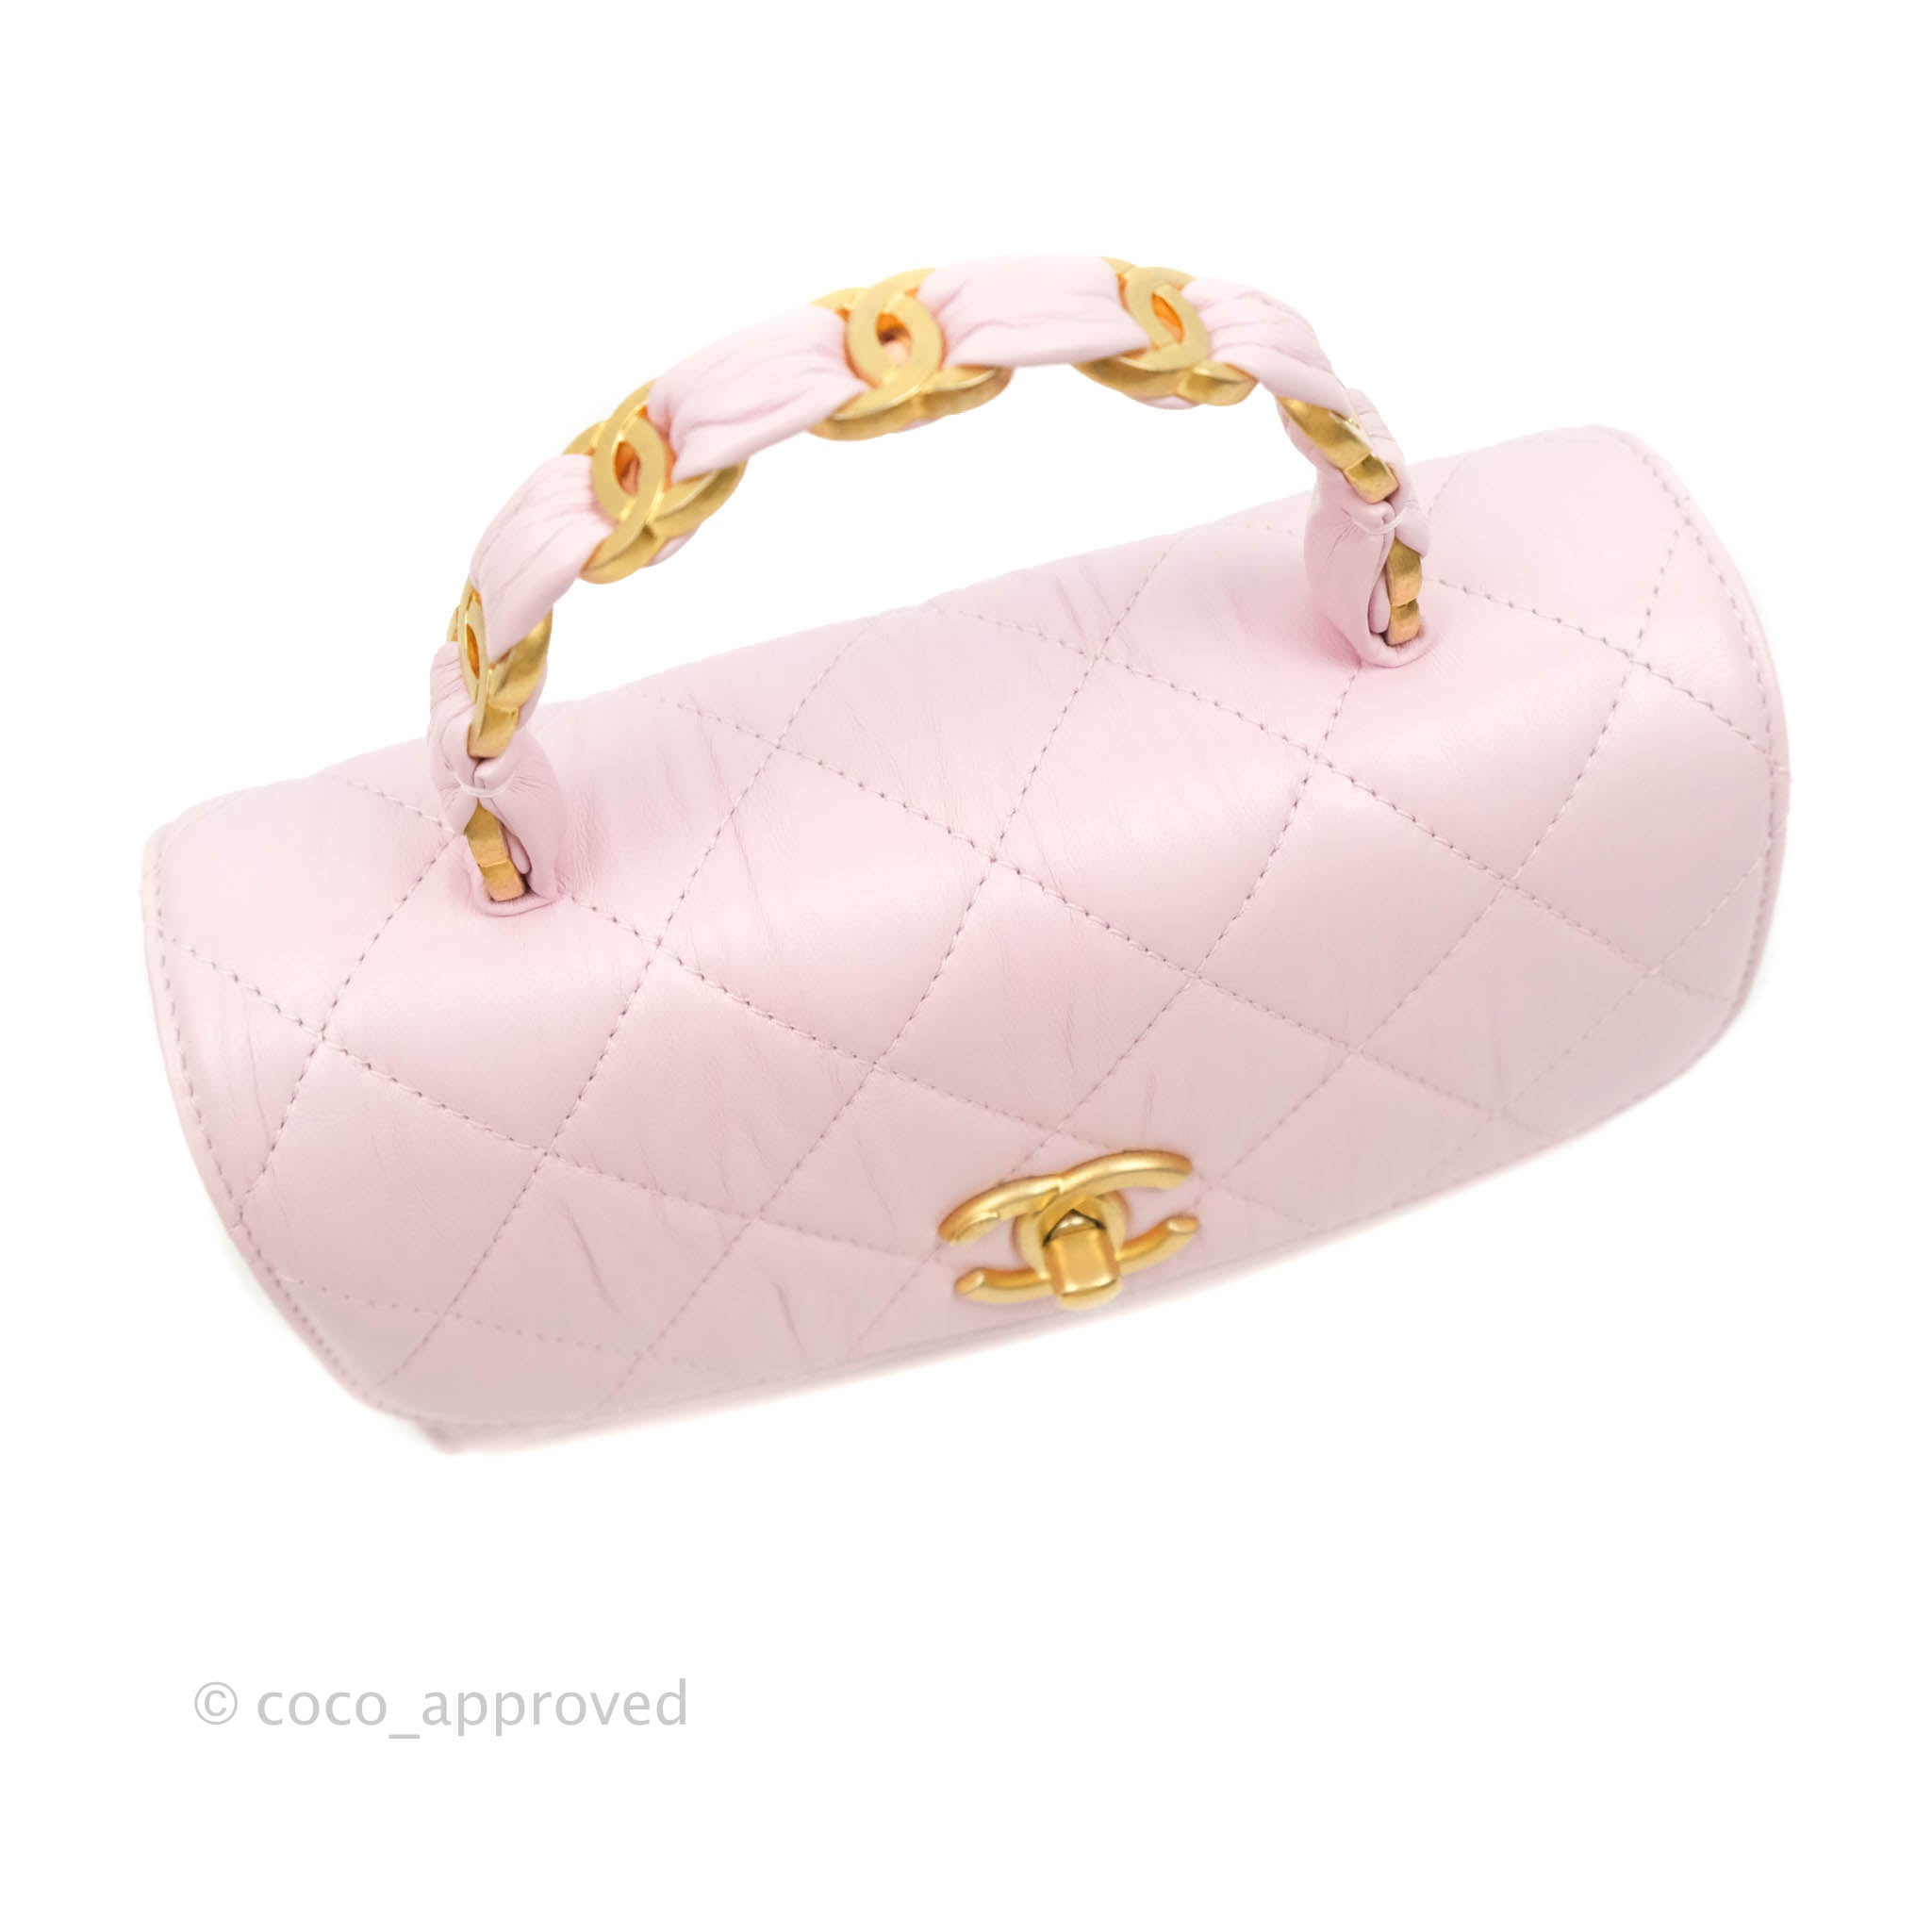 Chanel Pink Python Mini Coco Top Handle Flap Bag Brushed Gold